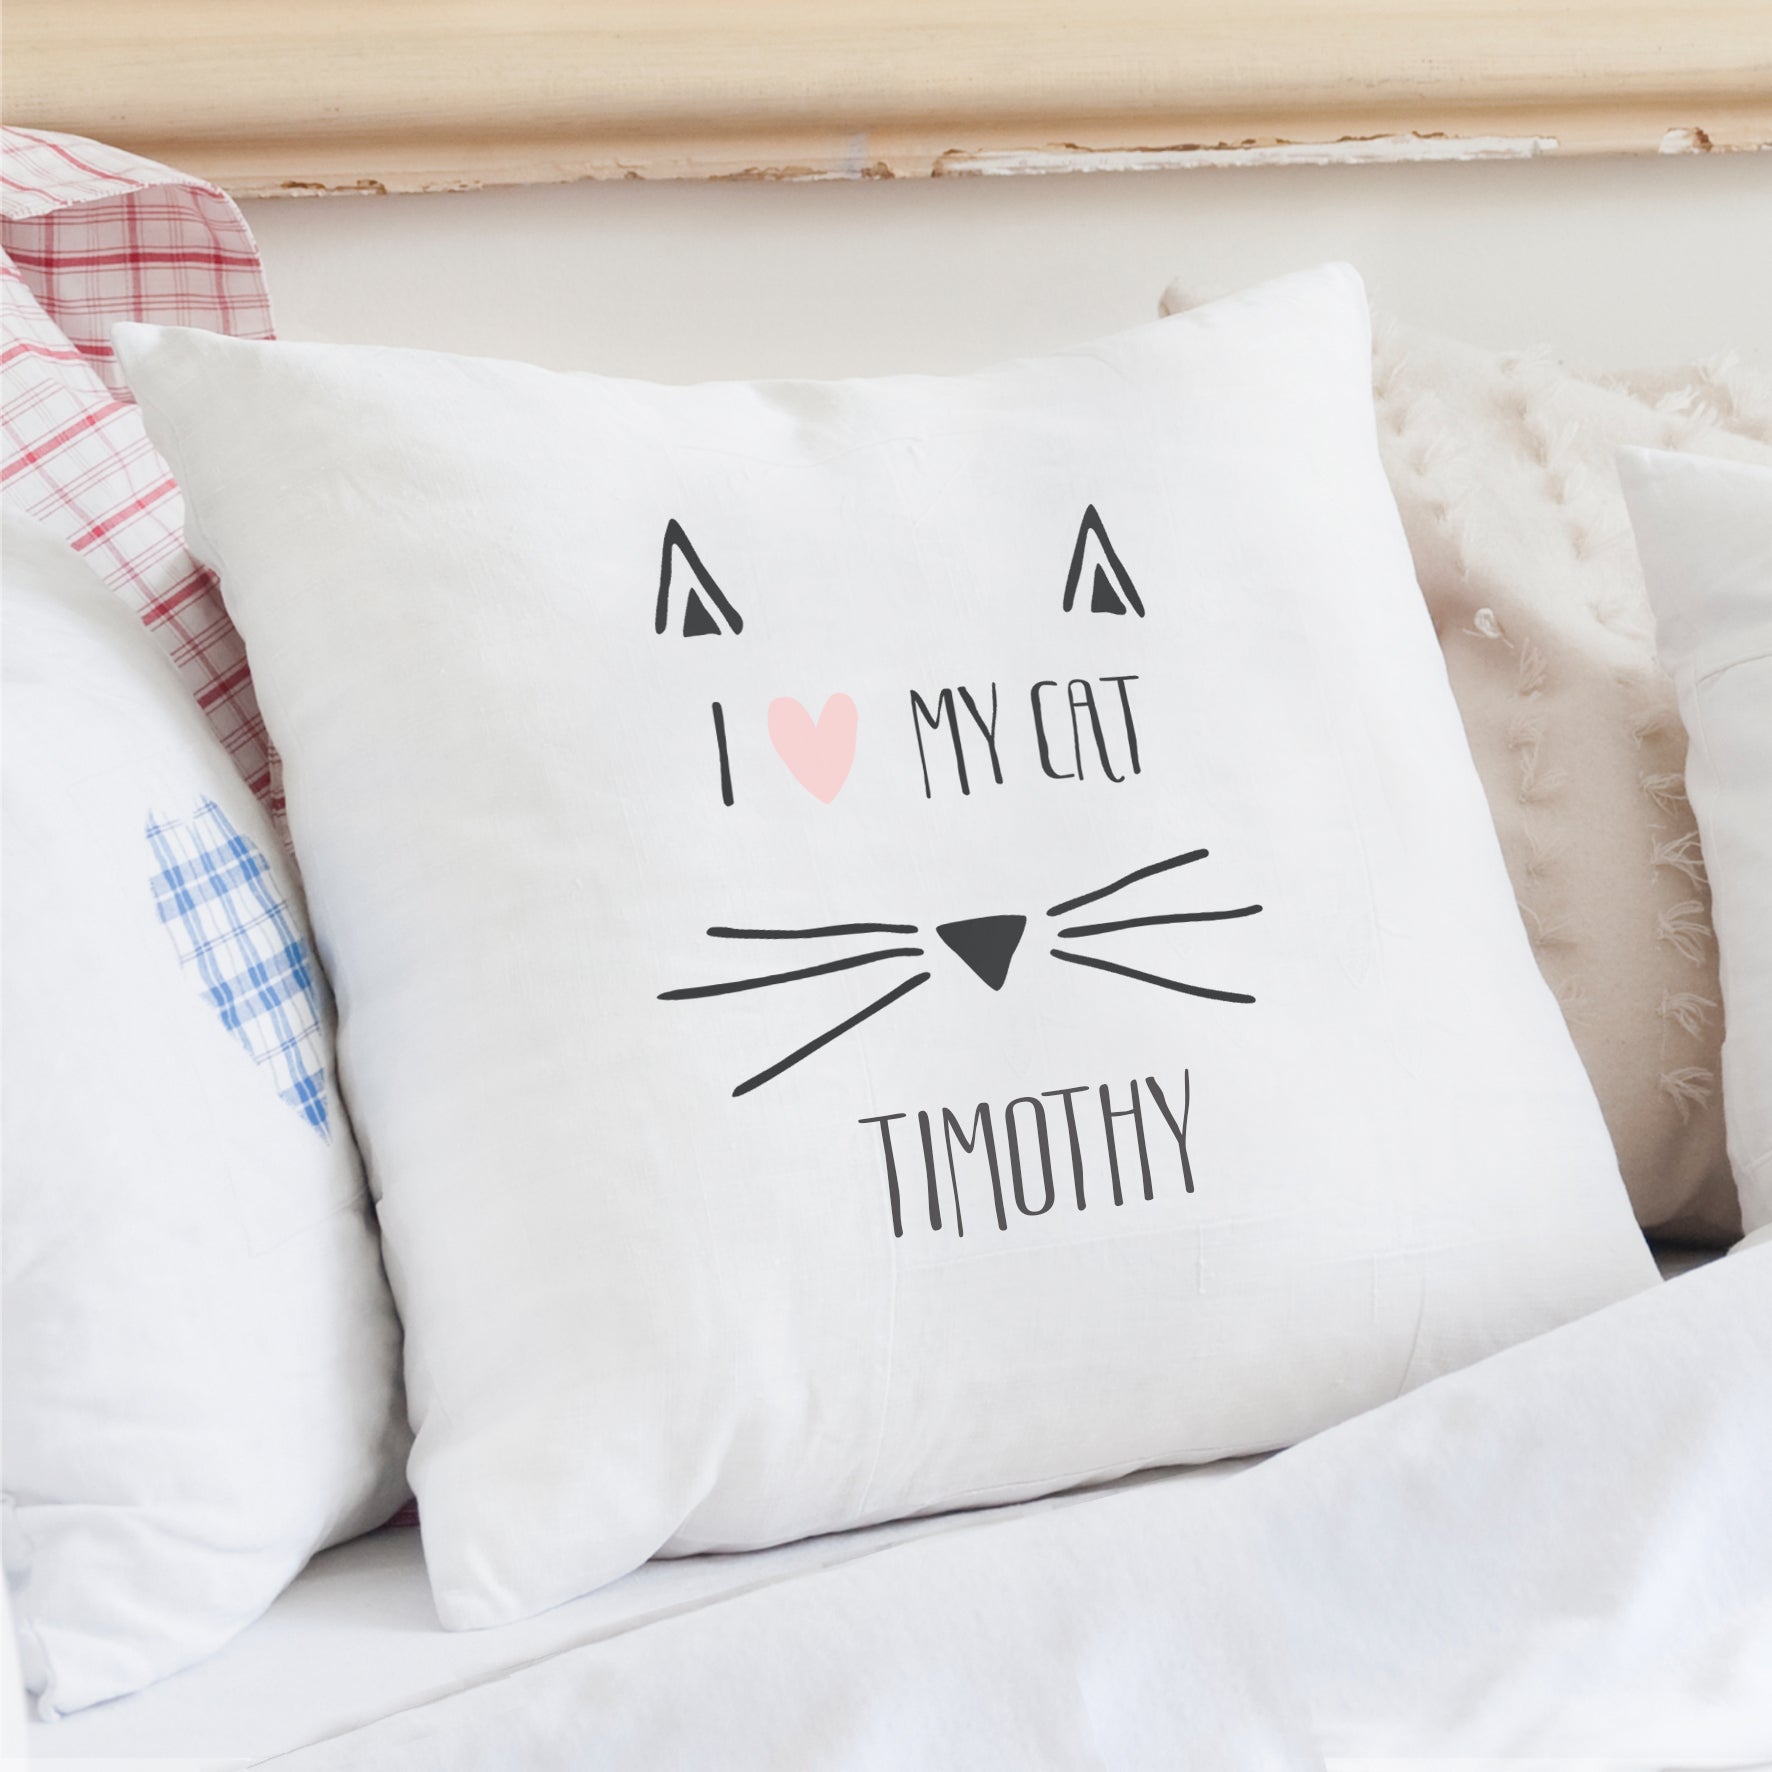 Image of a cushion cover which can be personalised with "I love my cat" and a name of your choice